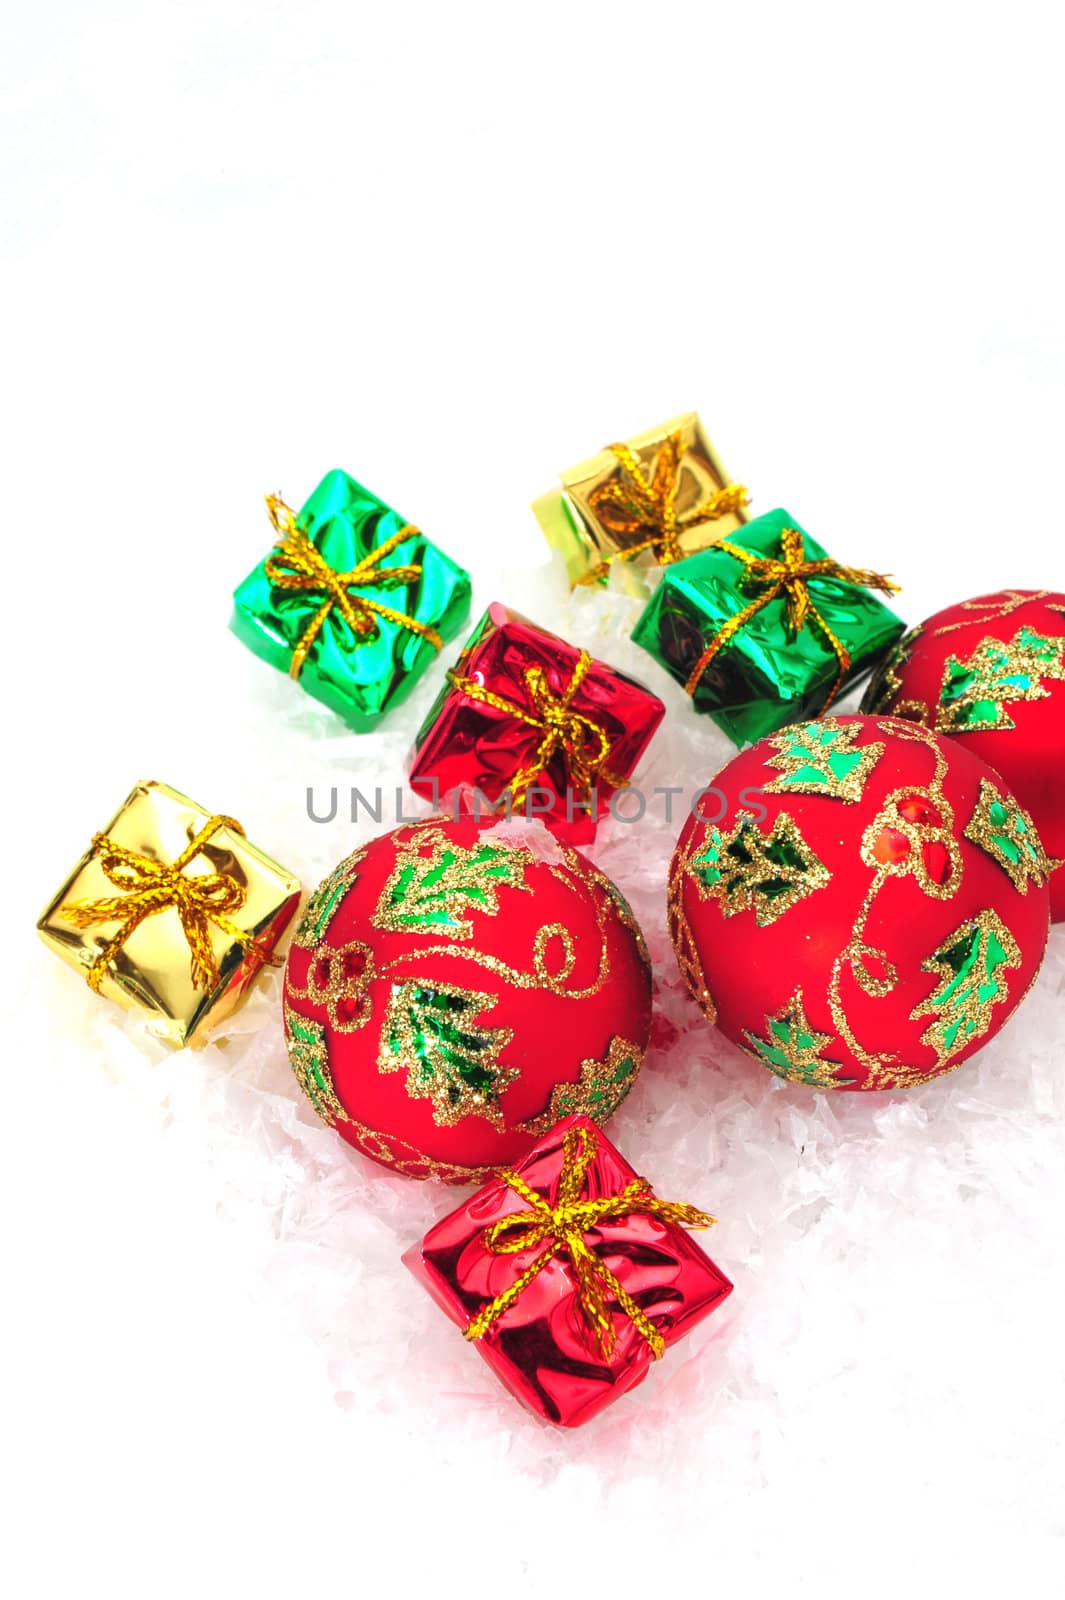 Red christmas tree ornaments and small colorful gifts